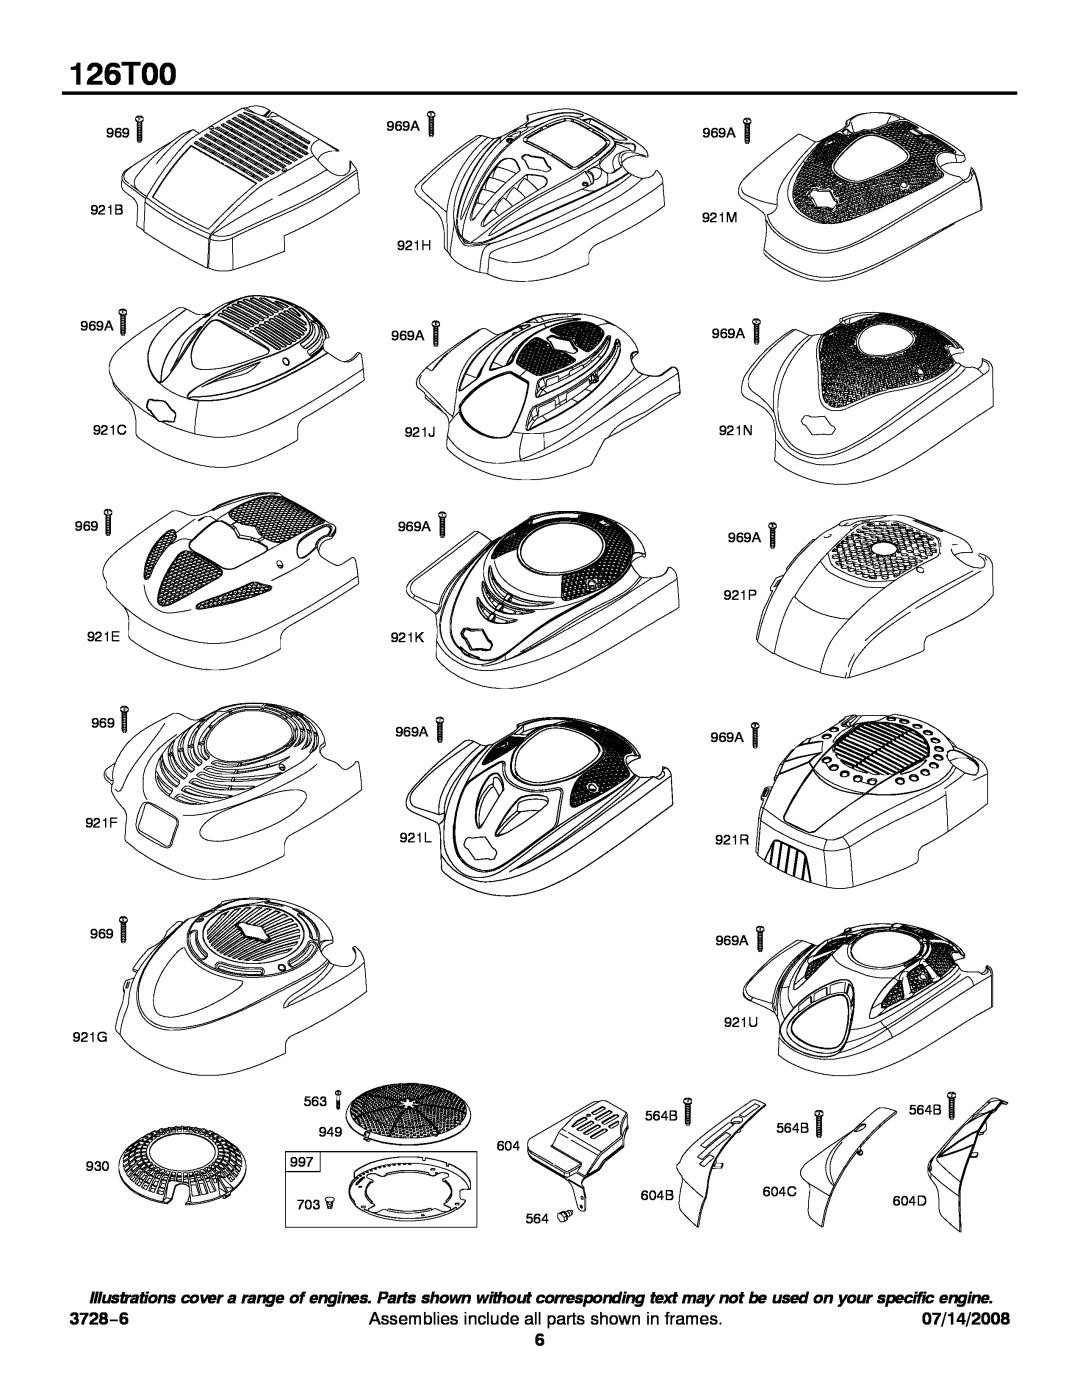 Snapper 126T00 service manual 3728−6, Assemblies include all parts shown in frames, 07/14/2008, 921B 